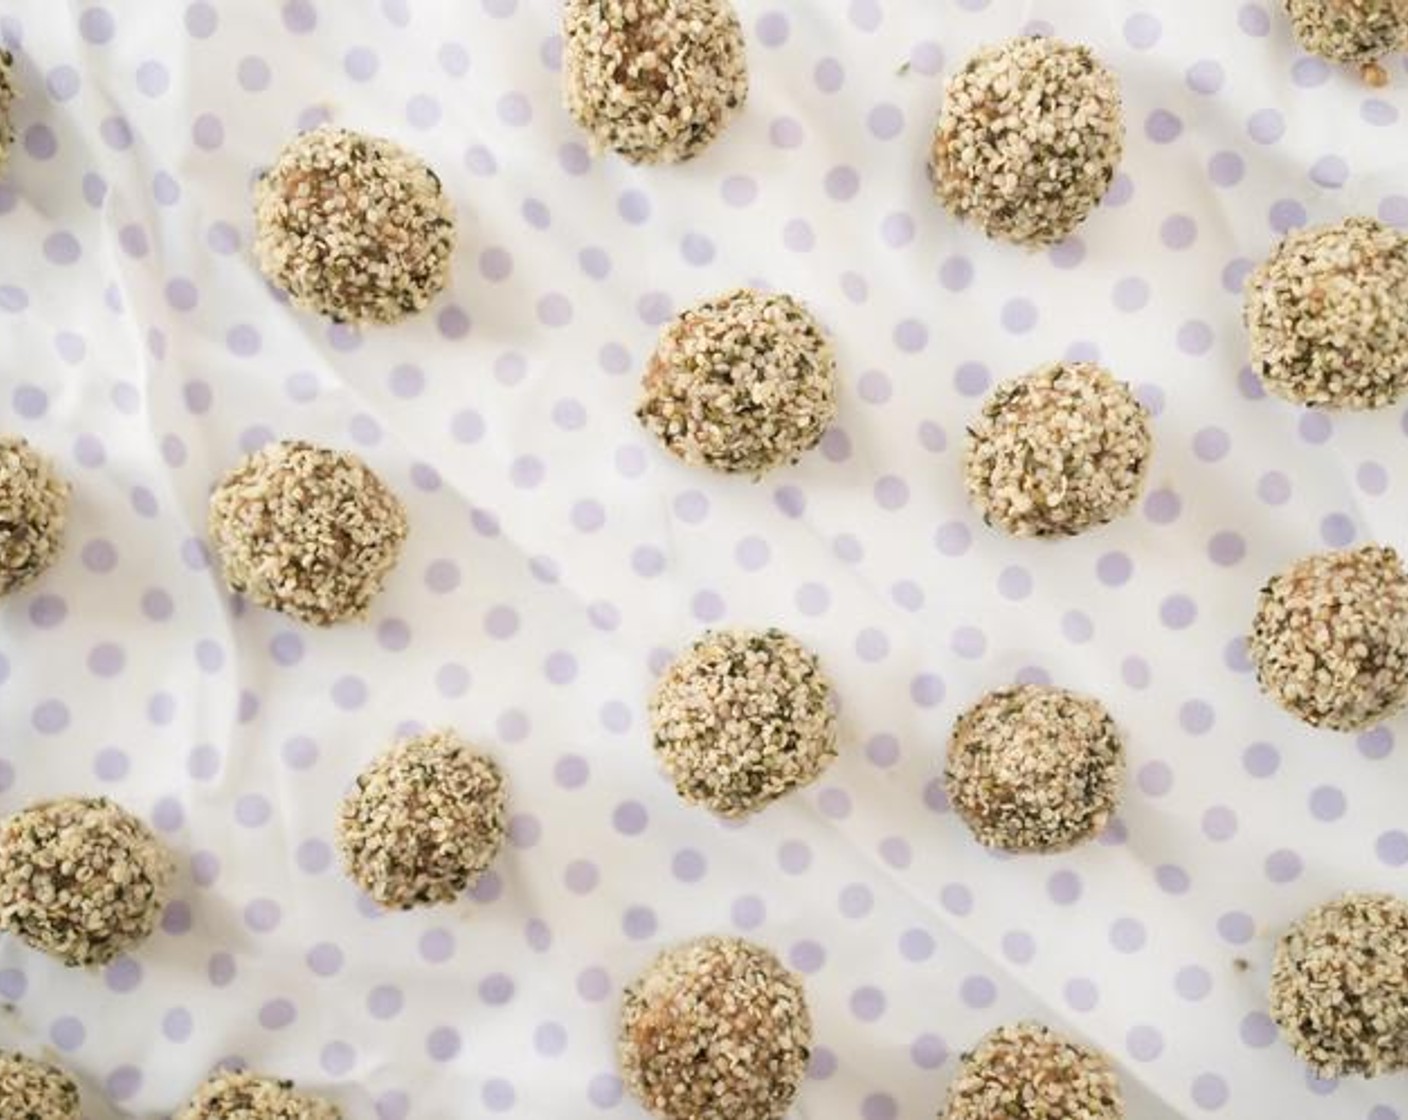 step 2 Roll mixture into 1-inch balls and roll in Hemp Hearts (1/3 cup). Refrigerate or freeze for 4-5 hours.